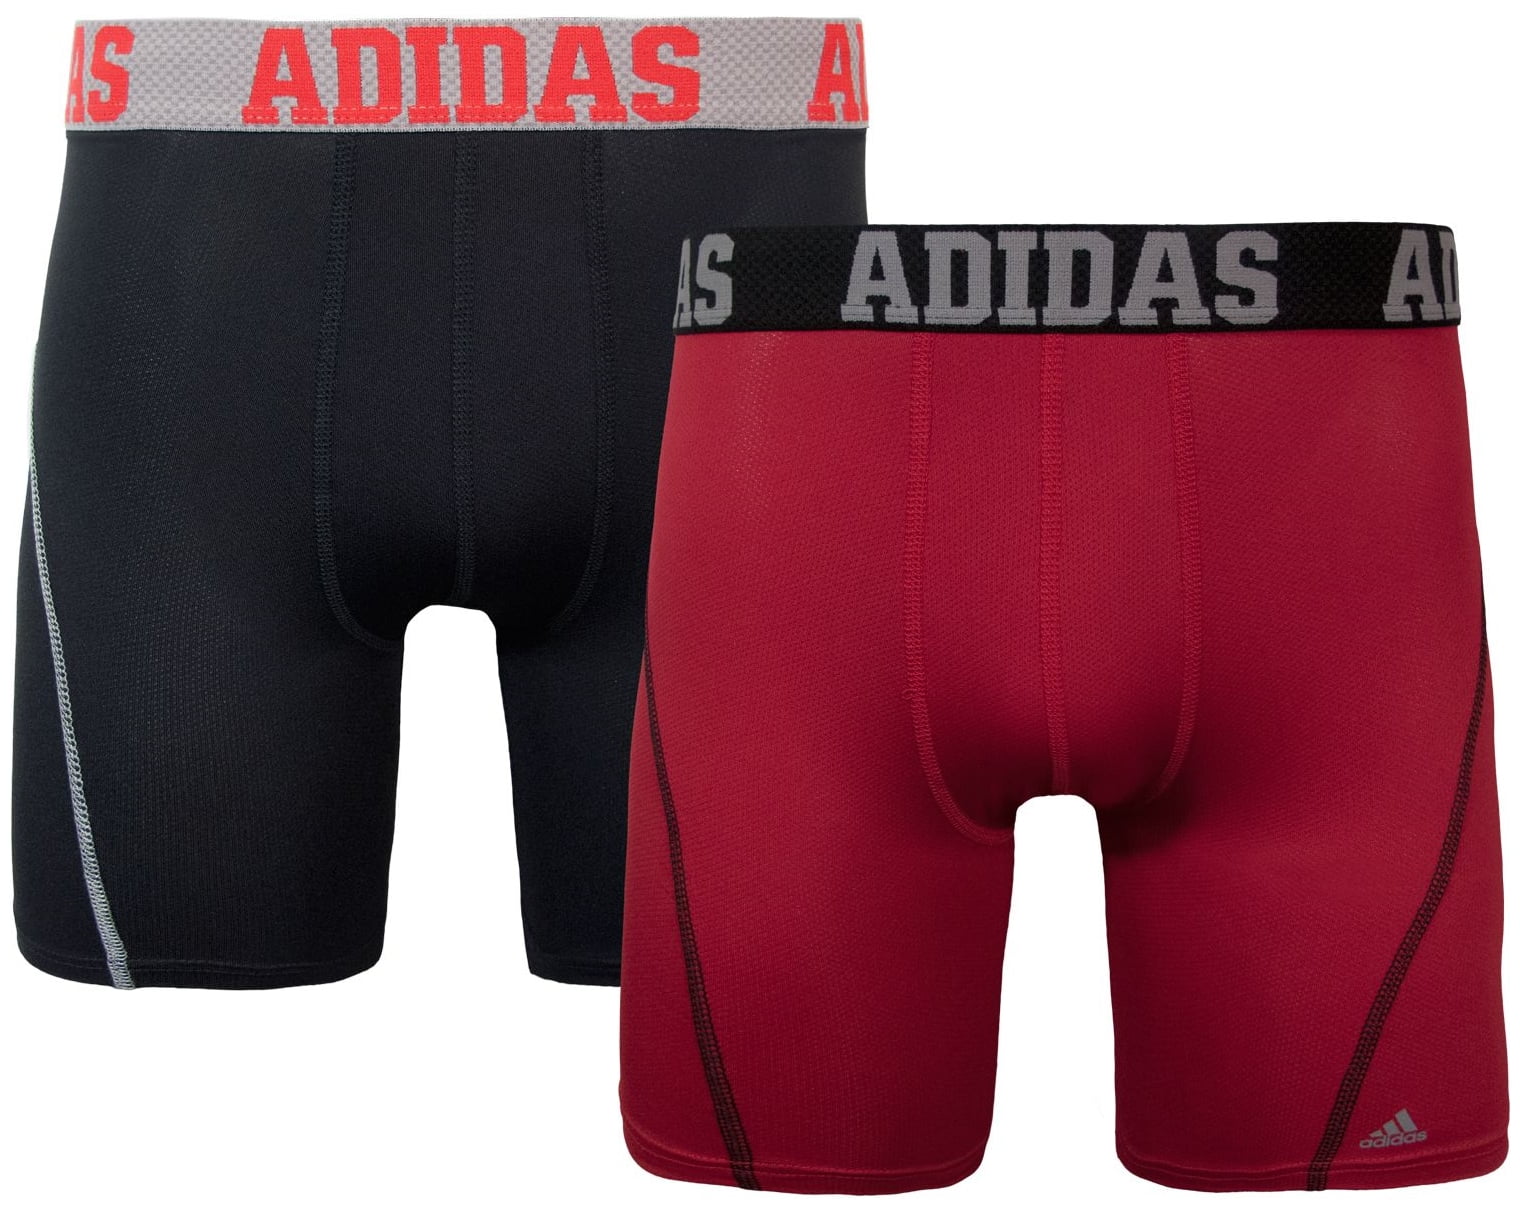 adidas men's climacool 7 midway briefs 6 pack